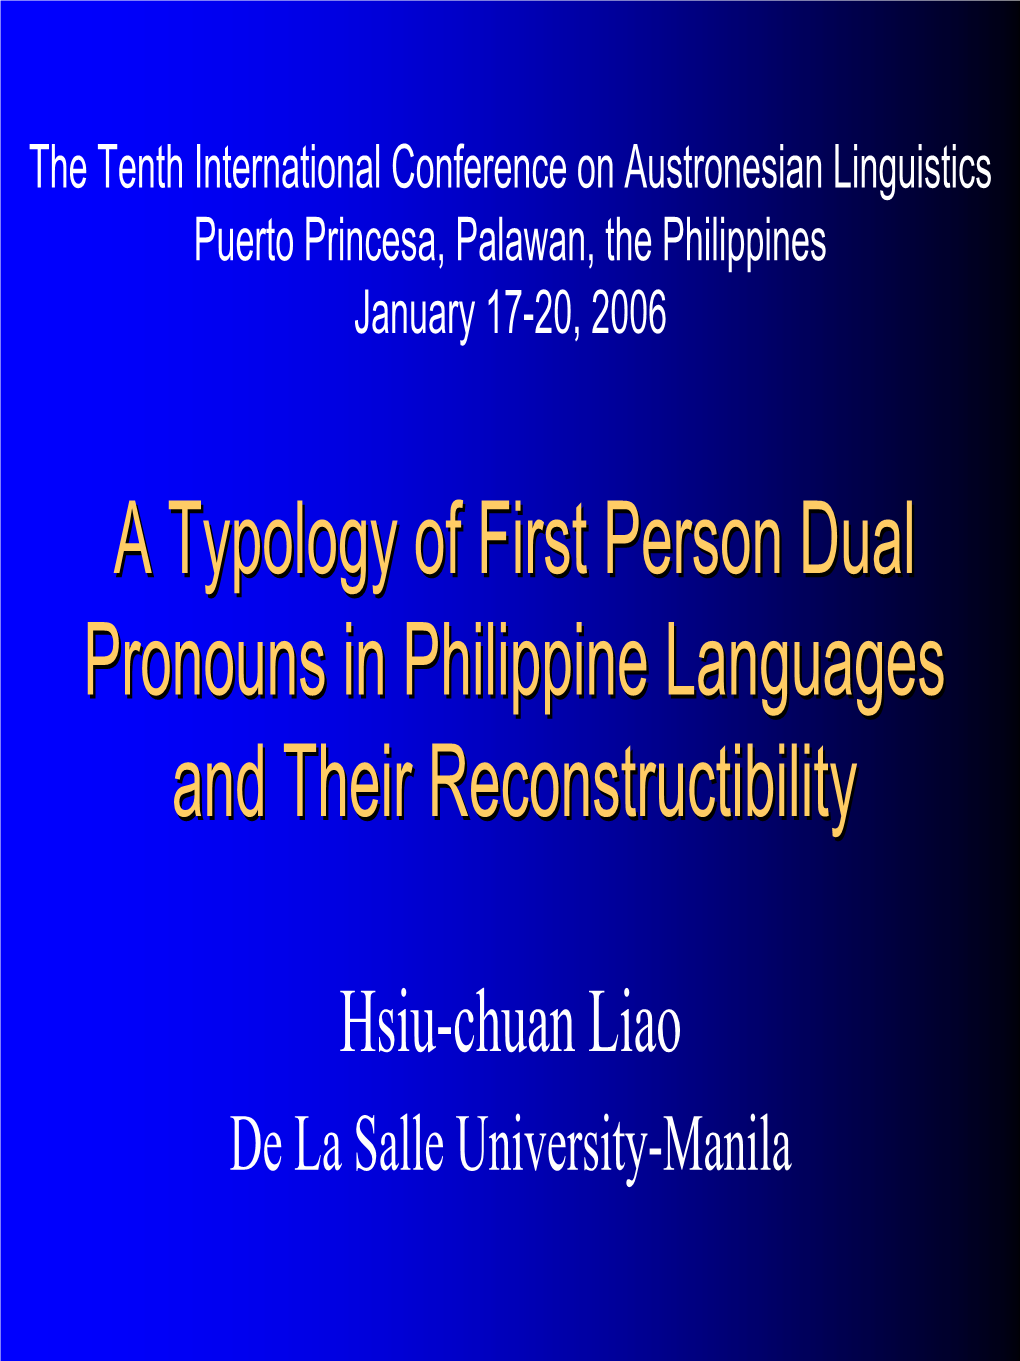 A Typology of First Person Dual Pronouns in Philippine Languages